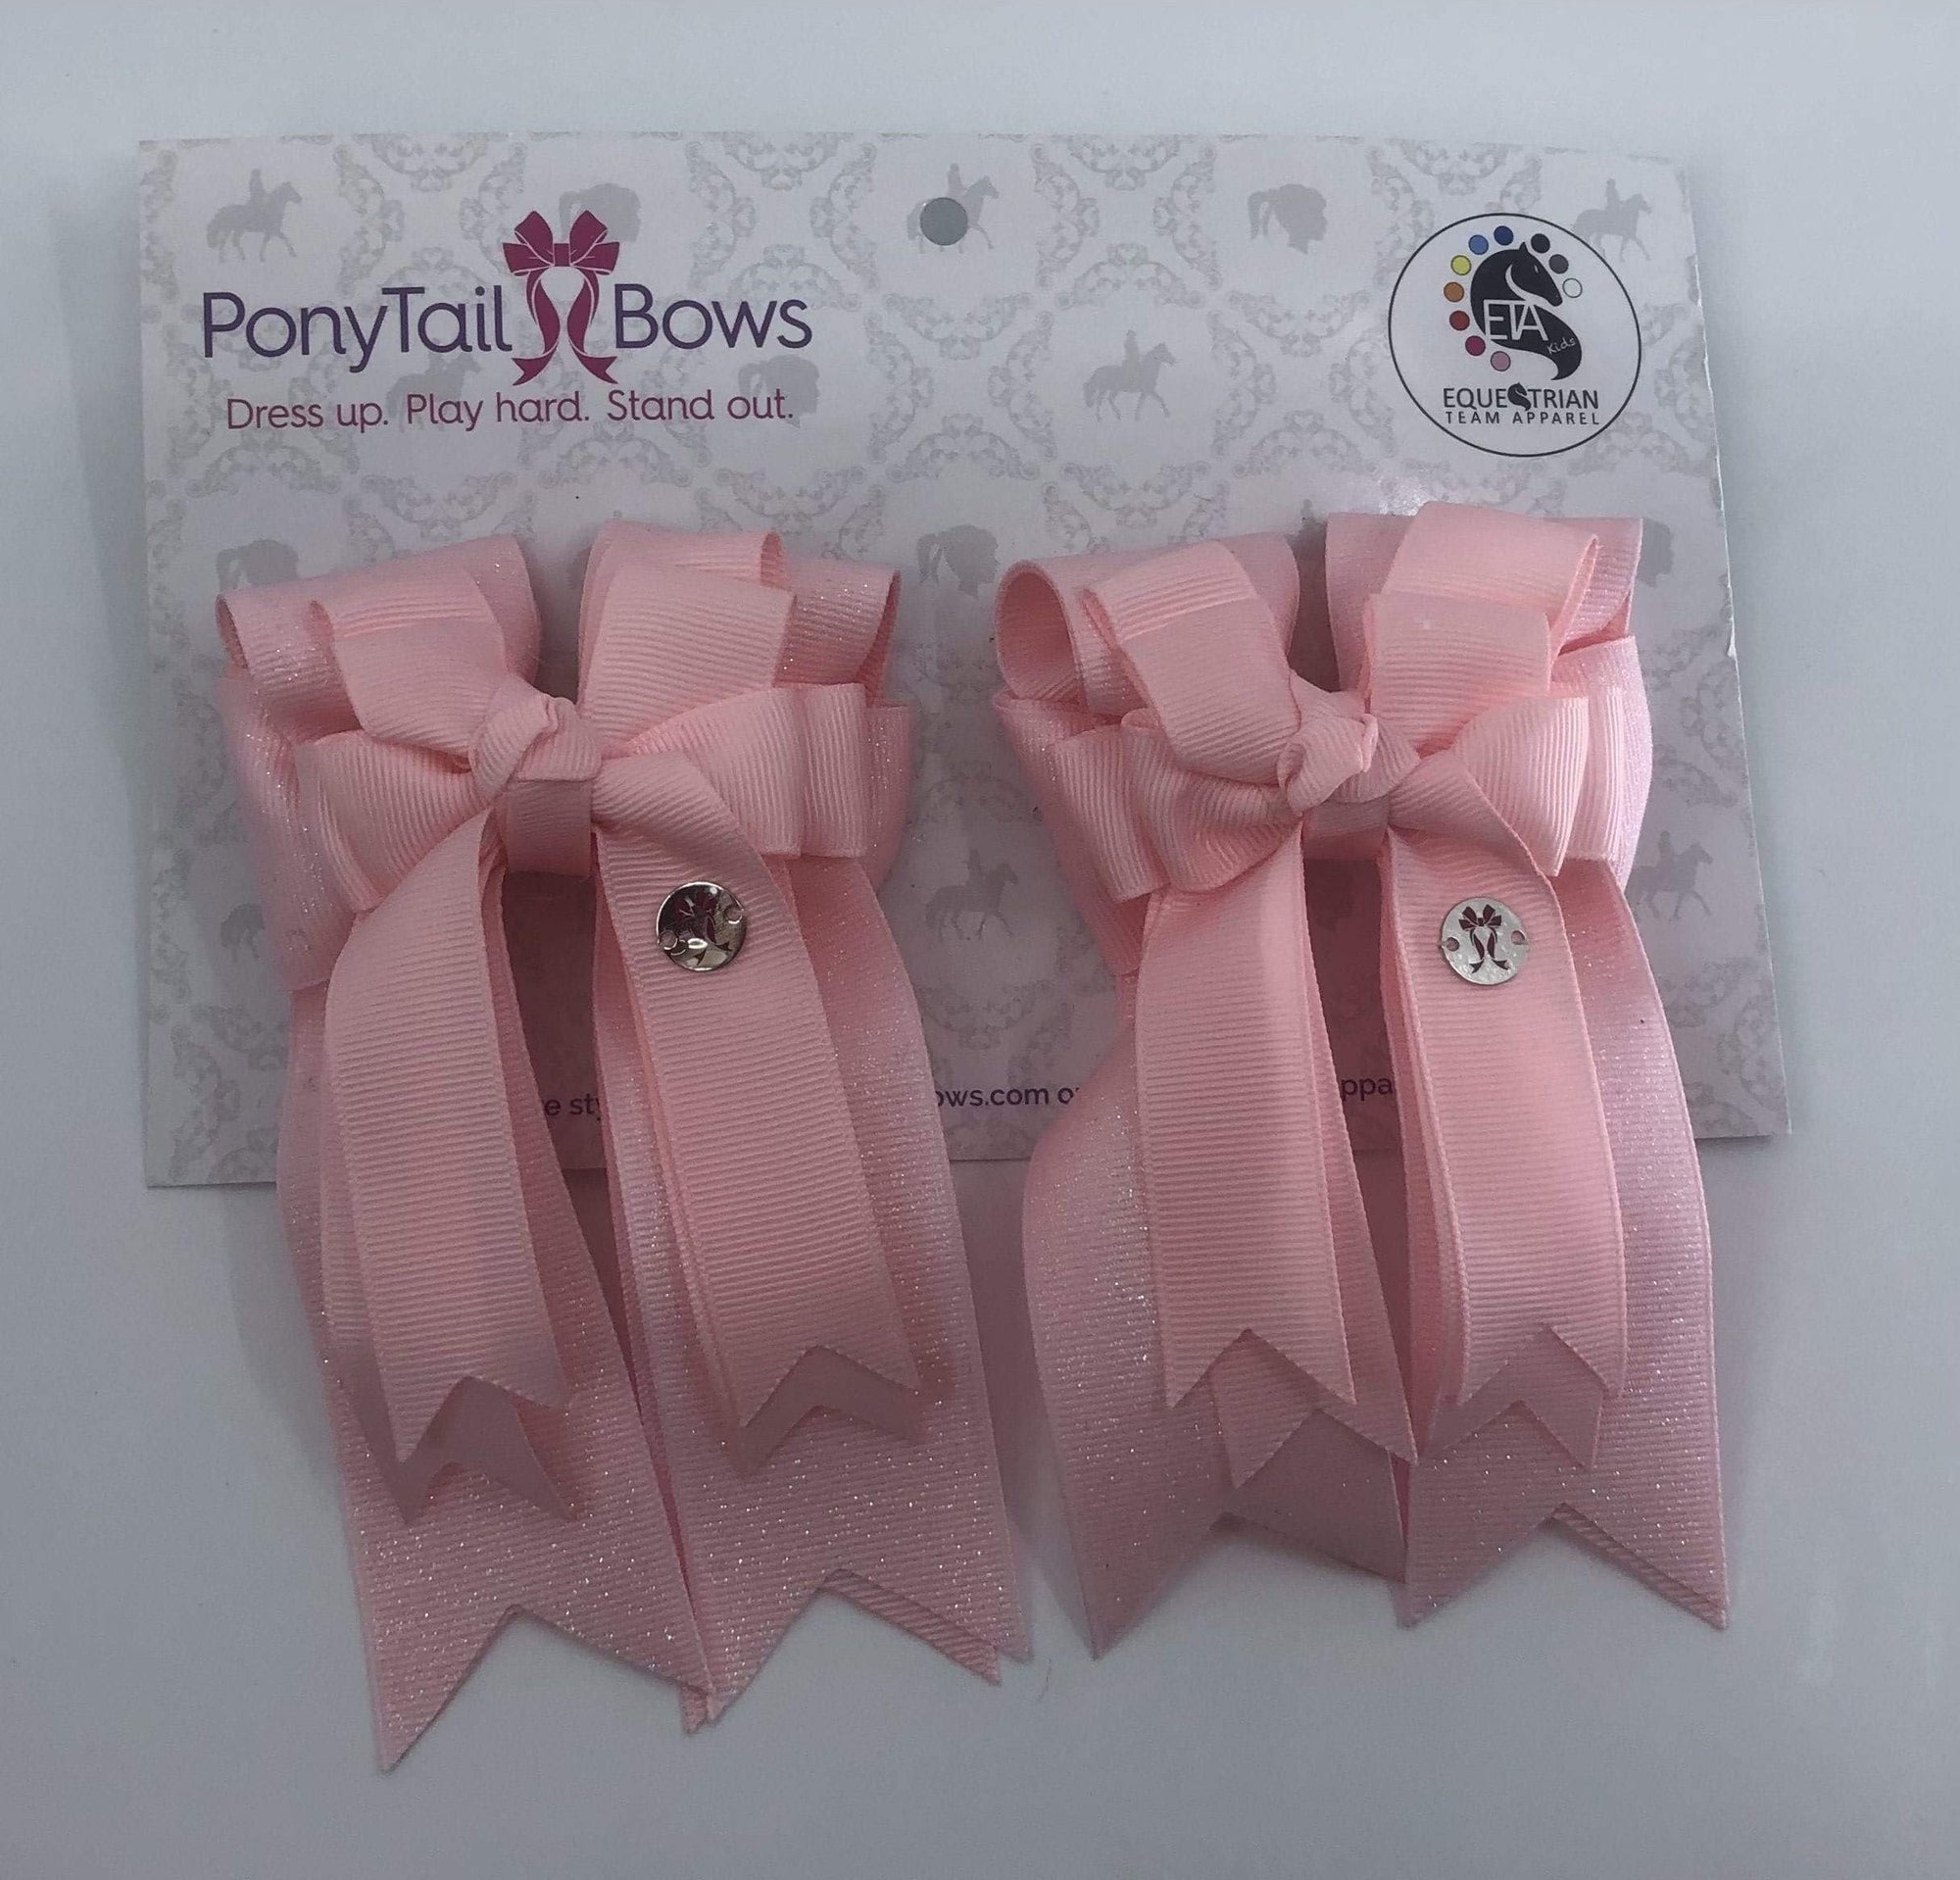 PonyTail Bows 3" Tails Baby Pink PonyTail Bows equestrian team apparel online tack store mobile tack store custom farm apparel custom show stable clothing equestrian lifestyle horse show clothing riding clothes Abbie Horse Show Bows | PonyTail Bows | Equestrian Hair Accessories horses equestrian tack store